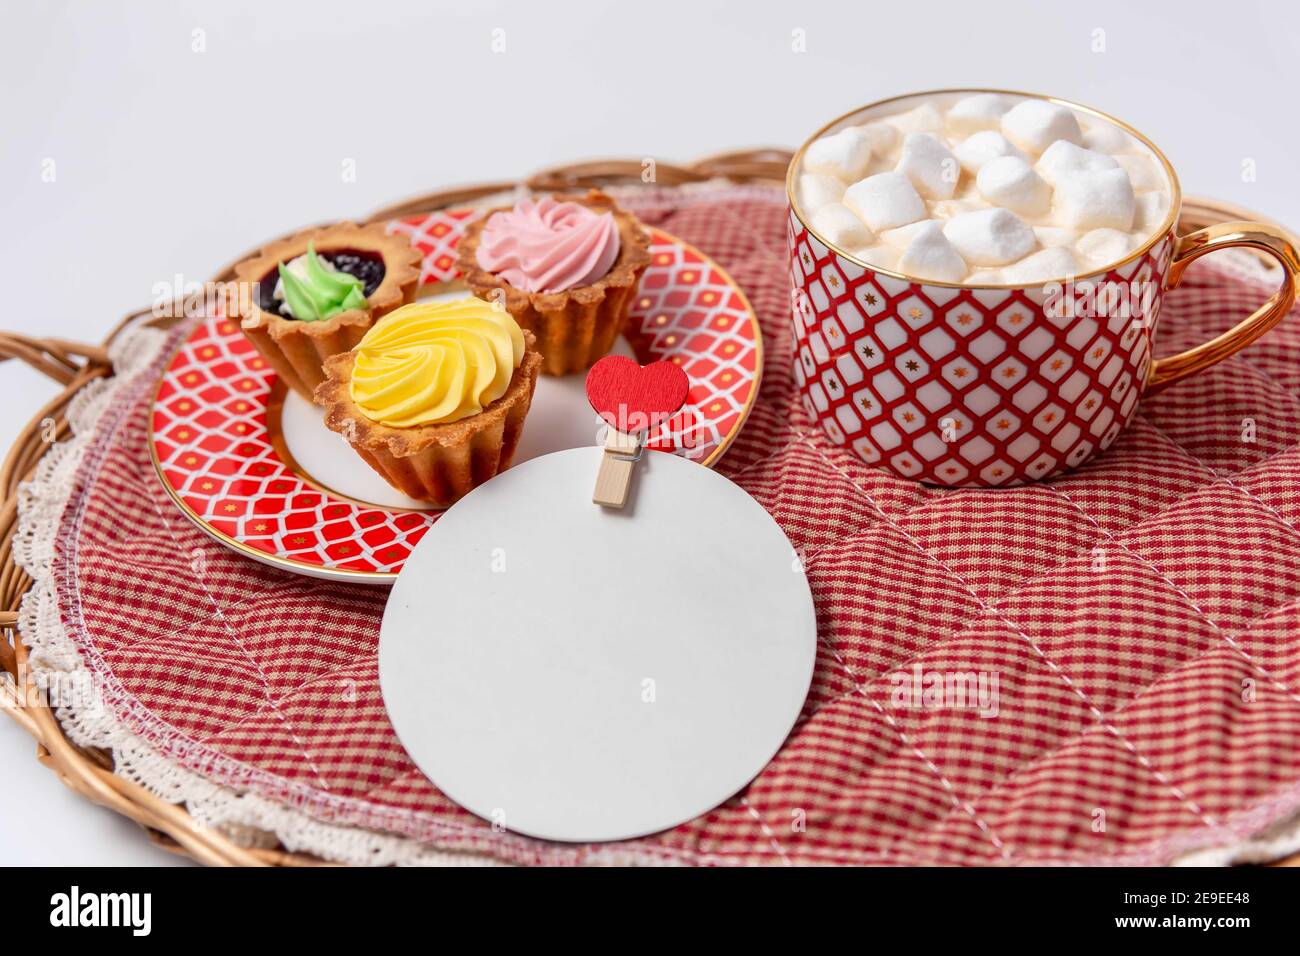 Caked with cream and a cup of hot cocoa with marshmallows. A place to greet the heart on the clothespin. Stock Photo